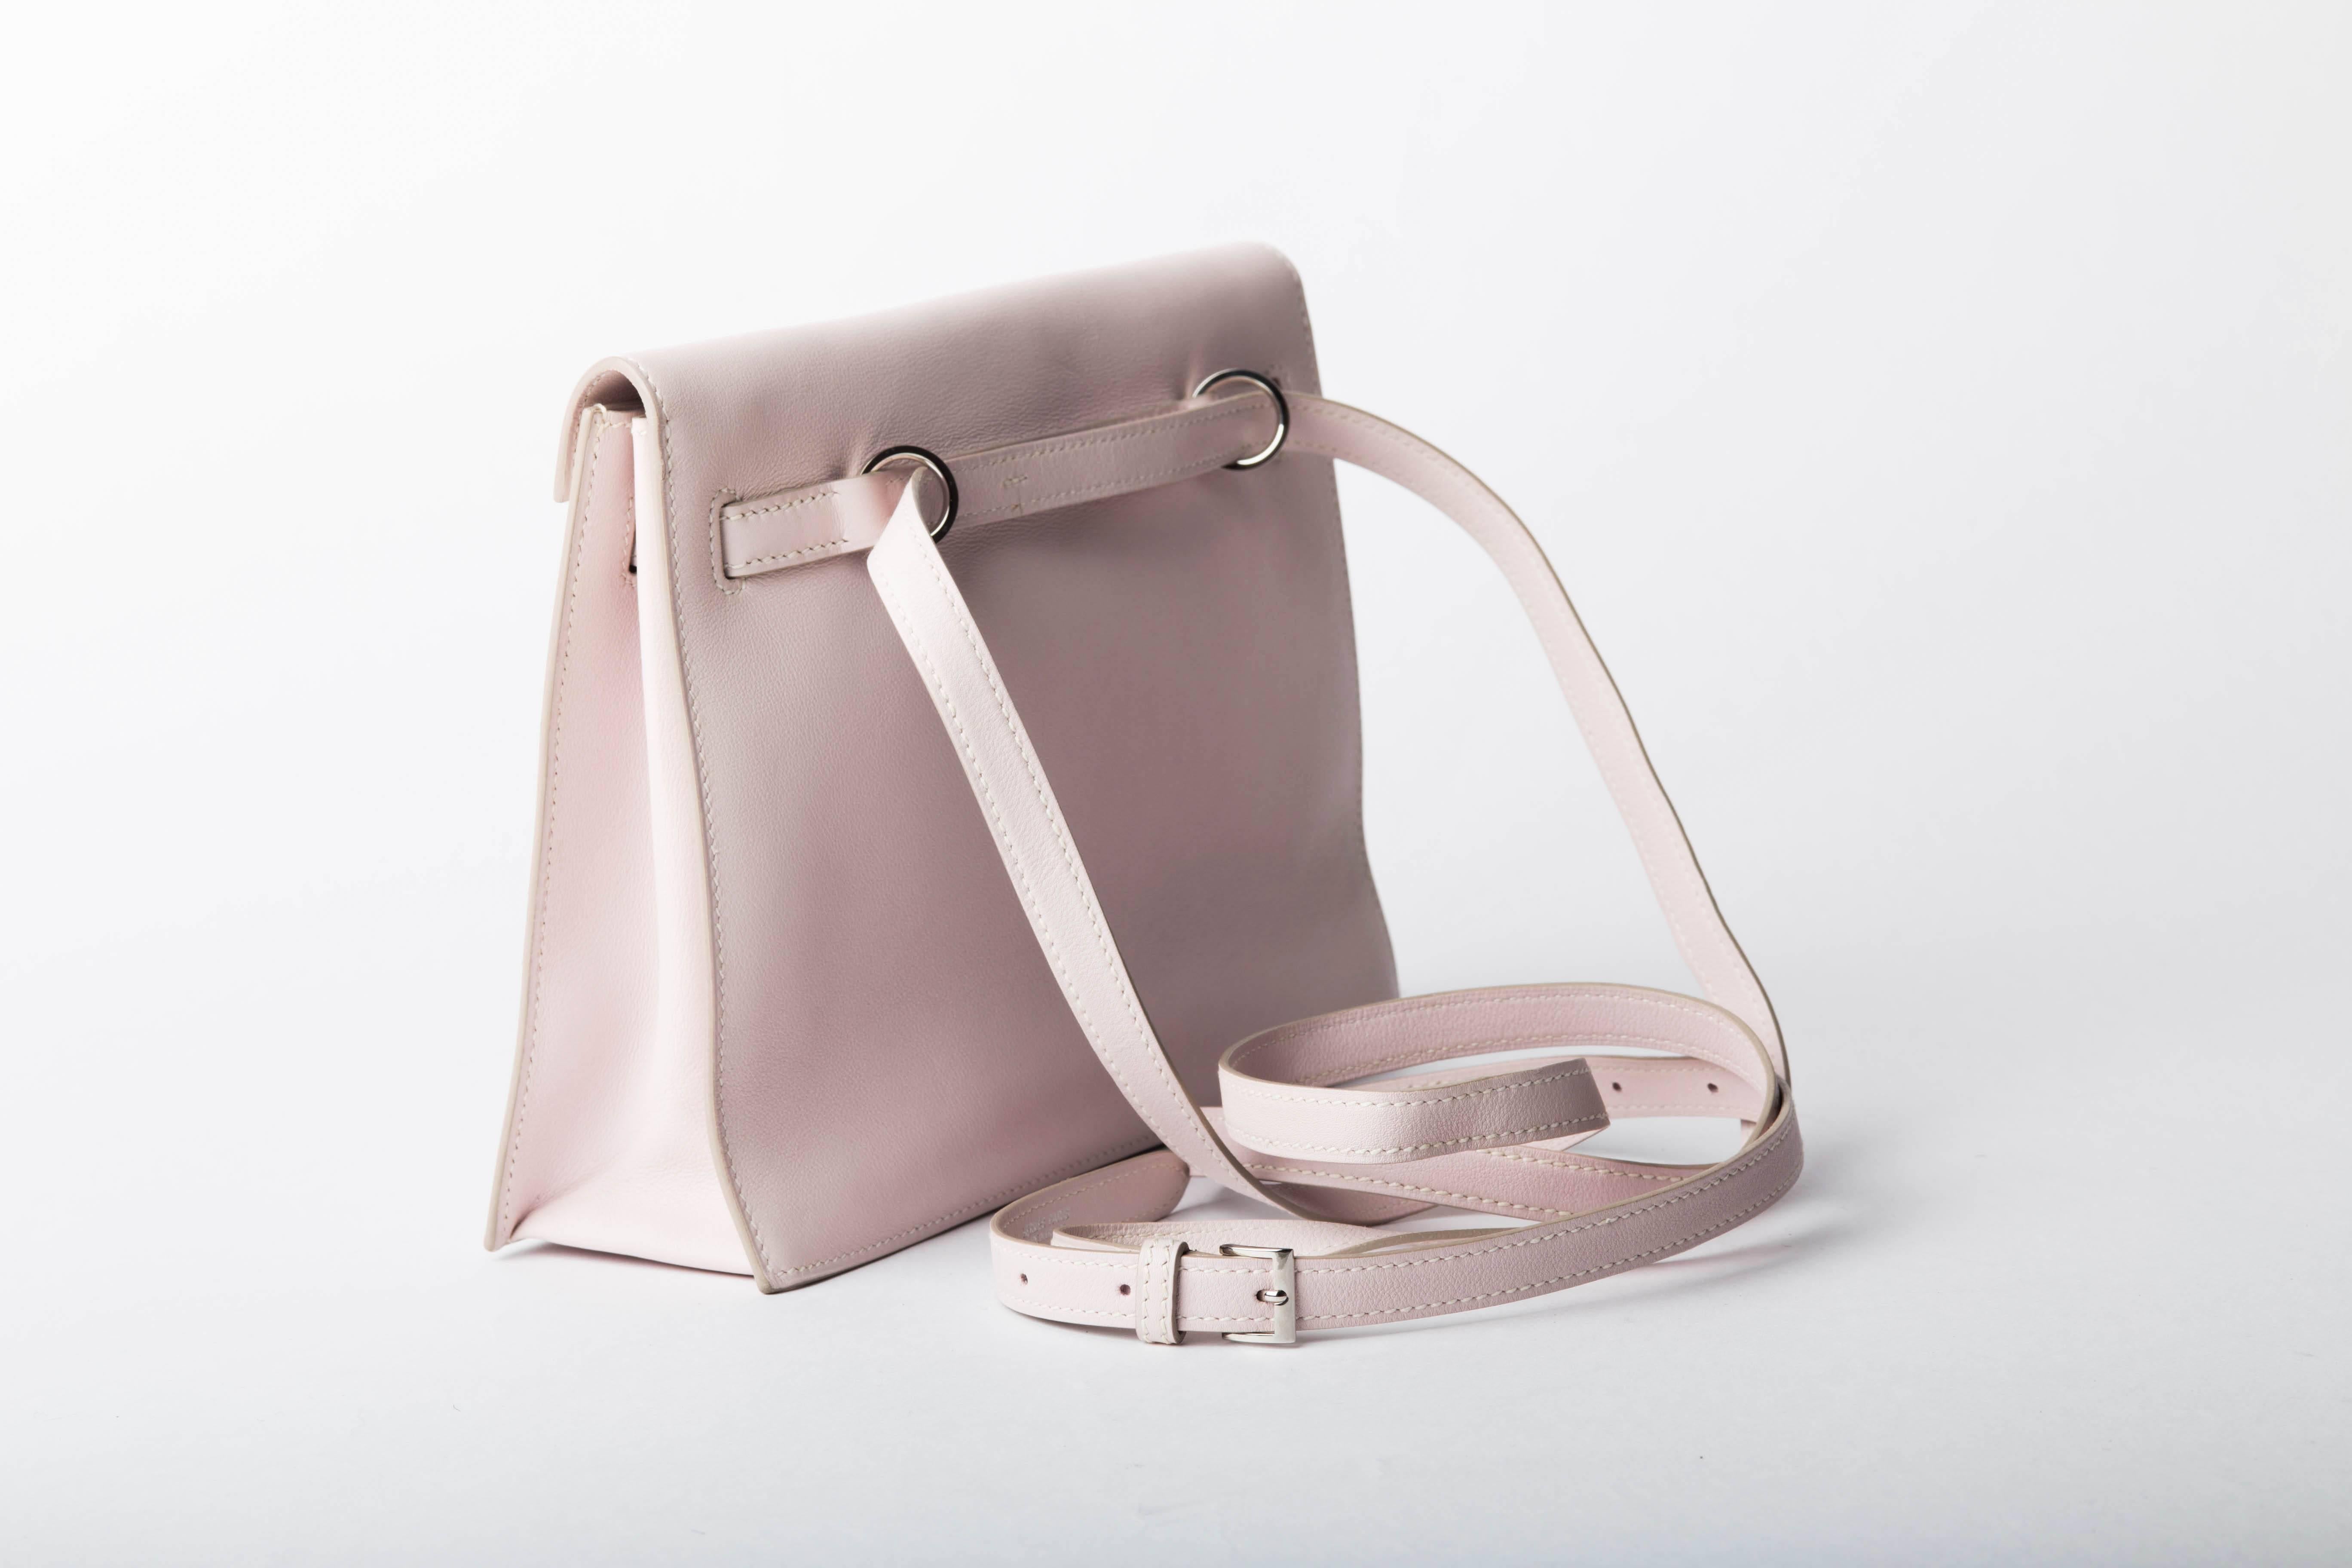 The Kelly Danse is quite similar to the Kelly iconic bag, but in the form of a shoulder strap. It comes with a long detachable strap, remove it and hide inside your bag to change into a chic evening clutch.
Meaning you can go from urban-cool to